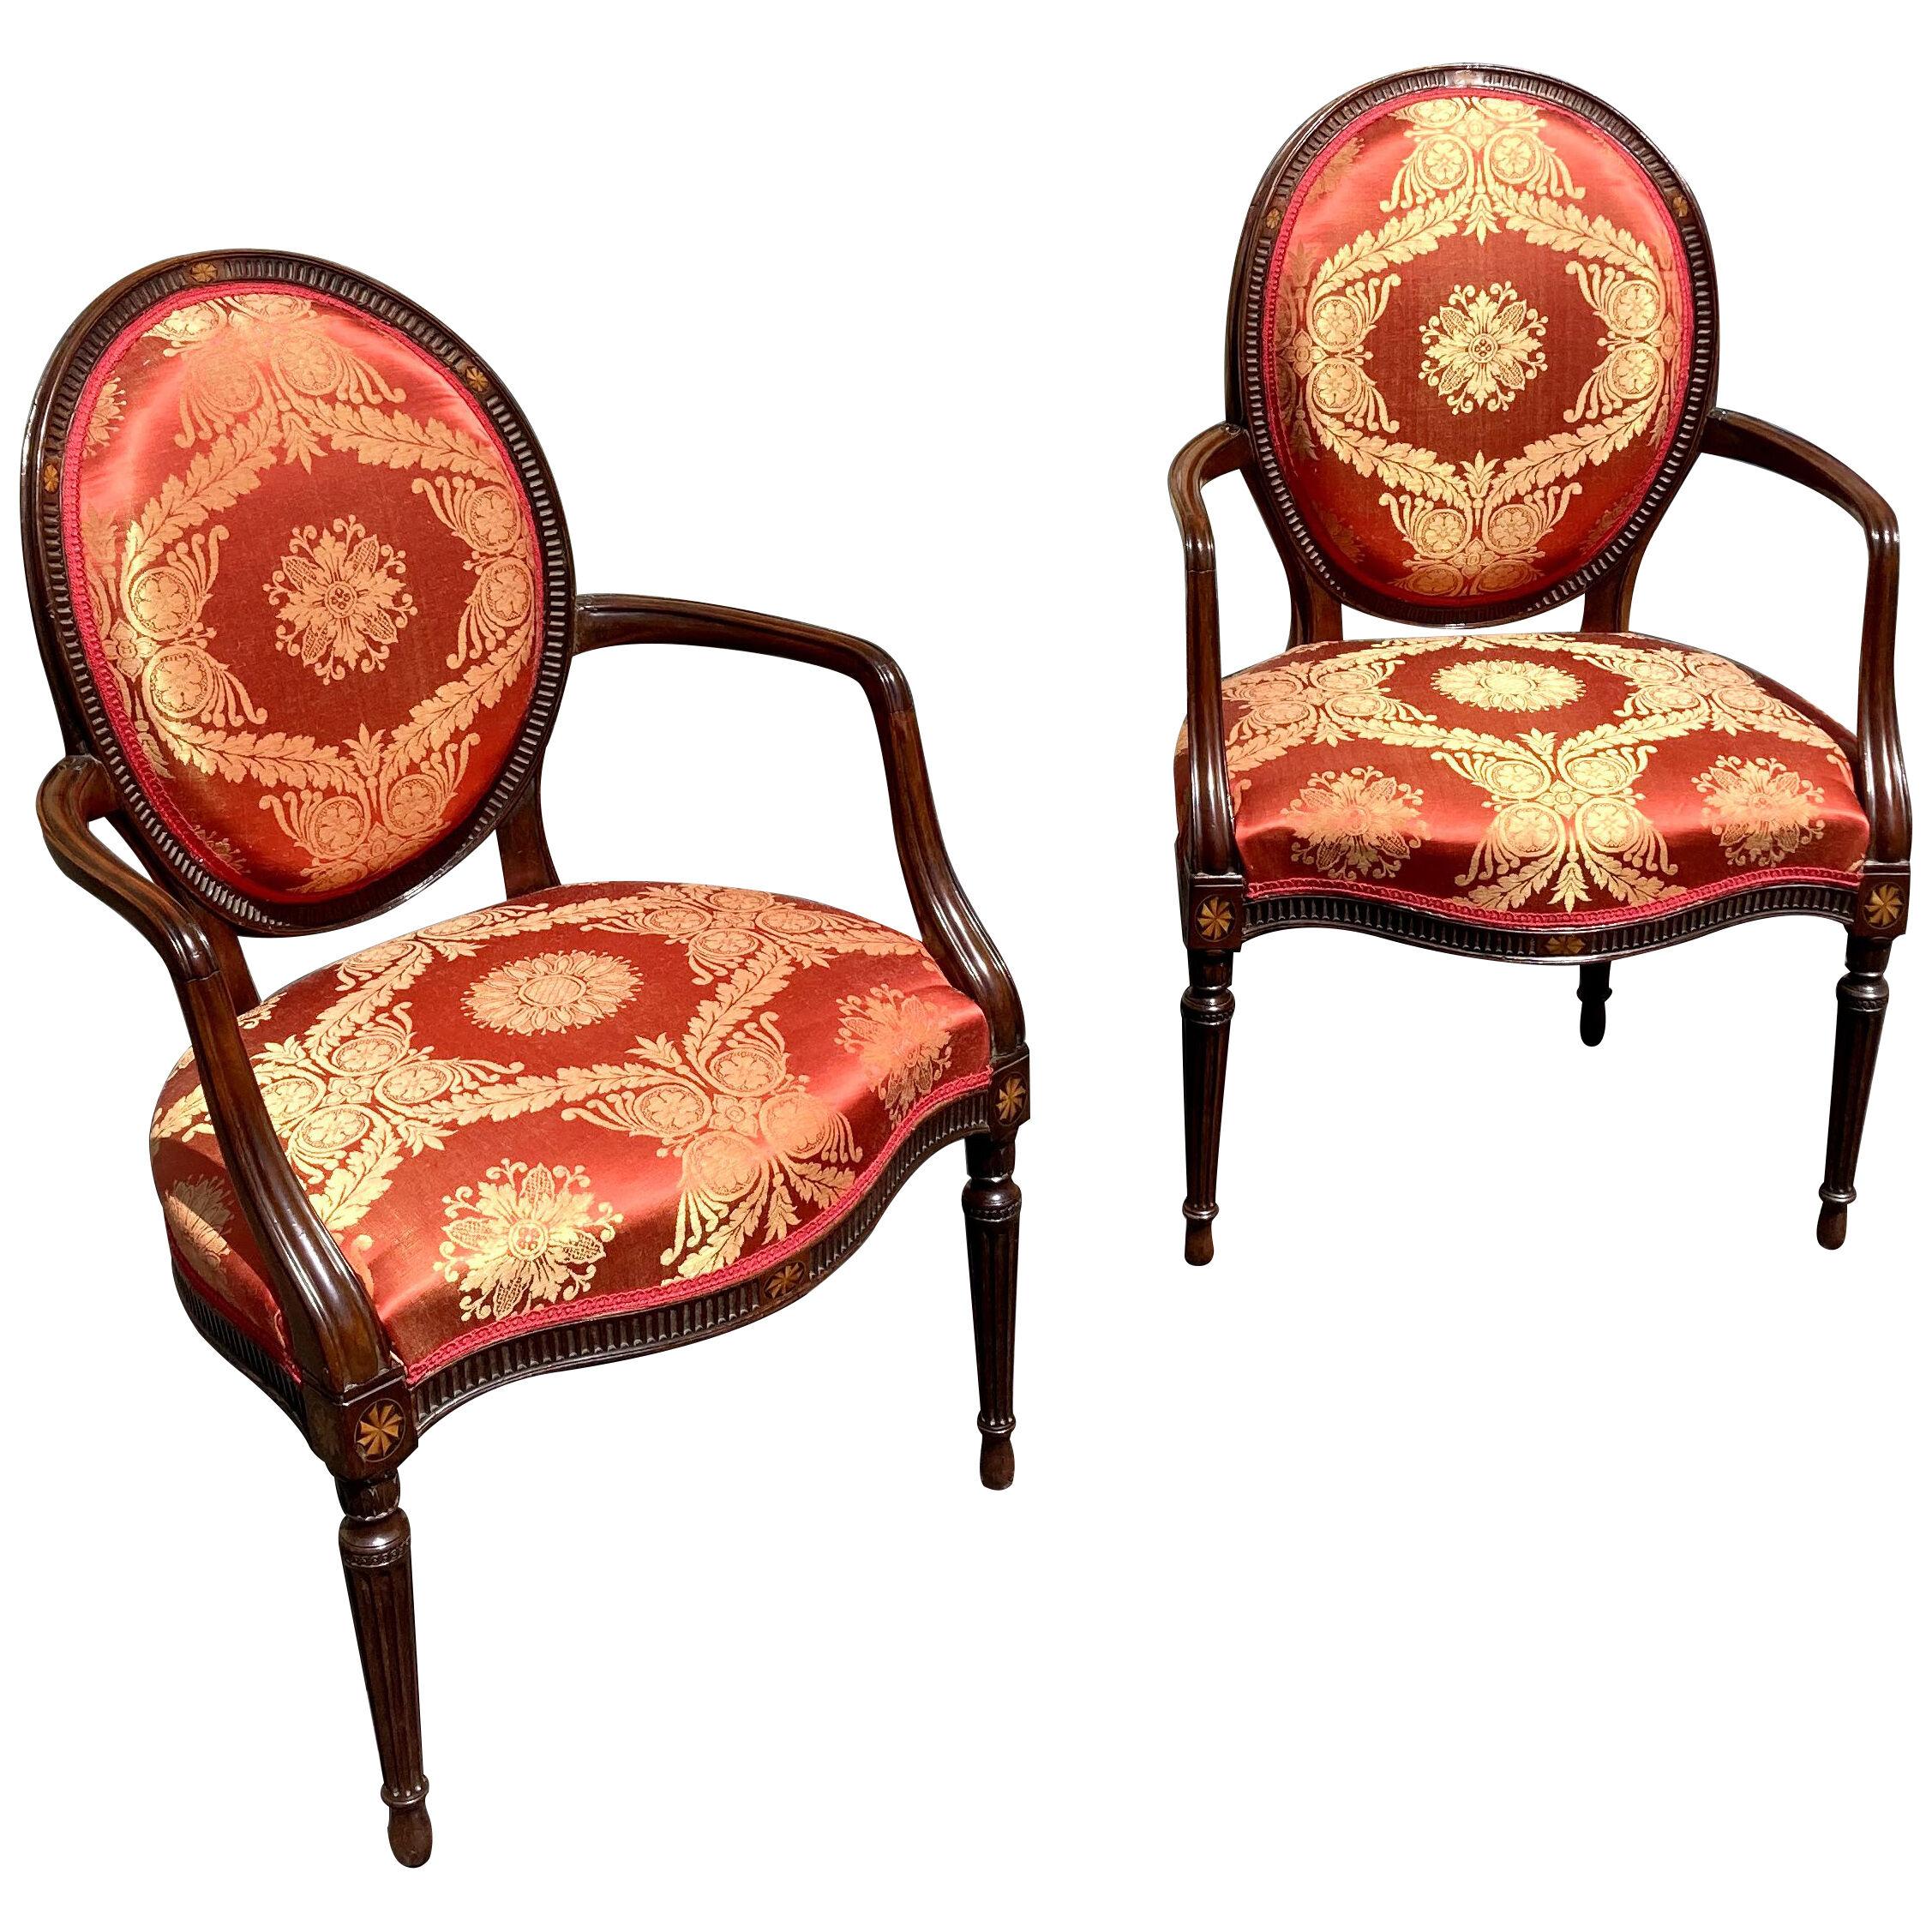 A pair of George III mahogany armchairs in the manner of John Linnell